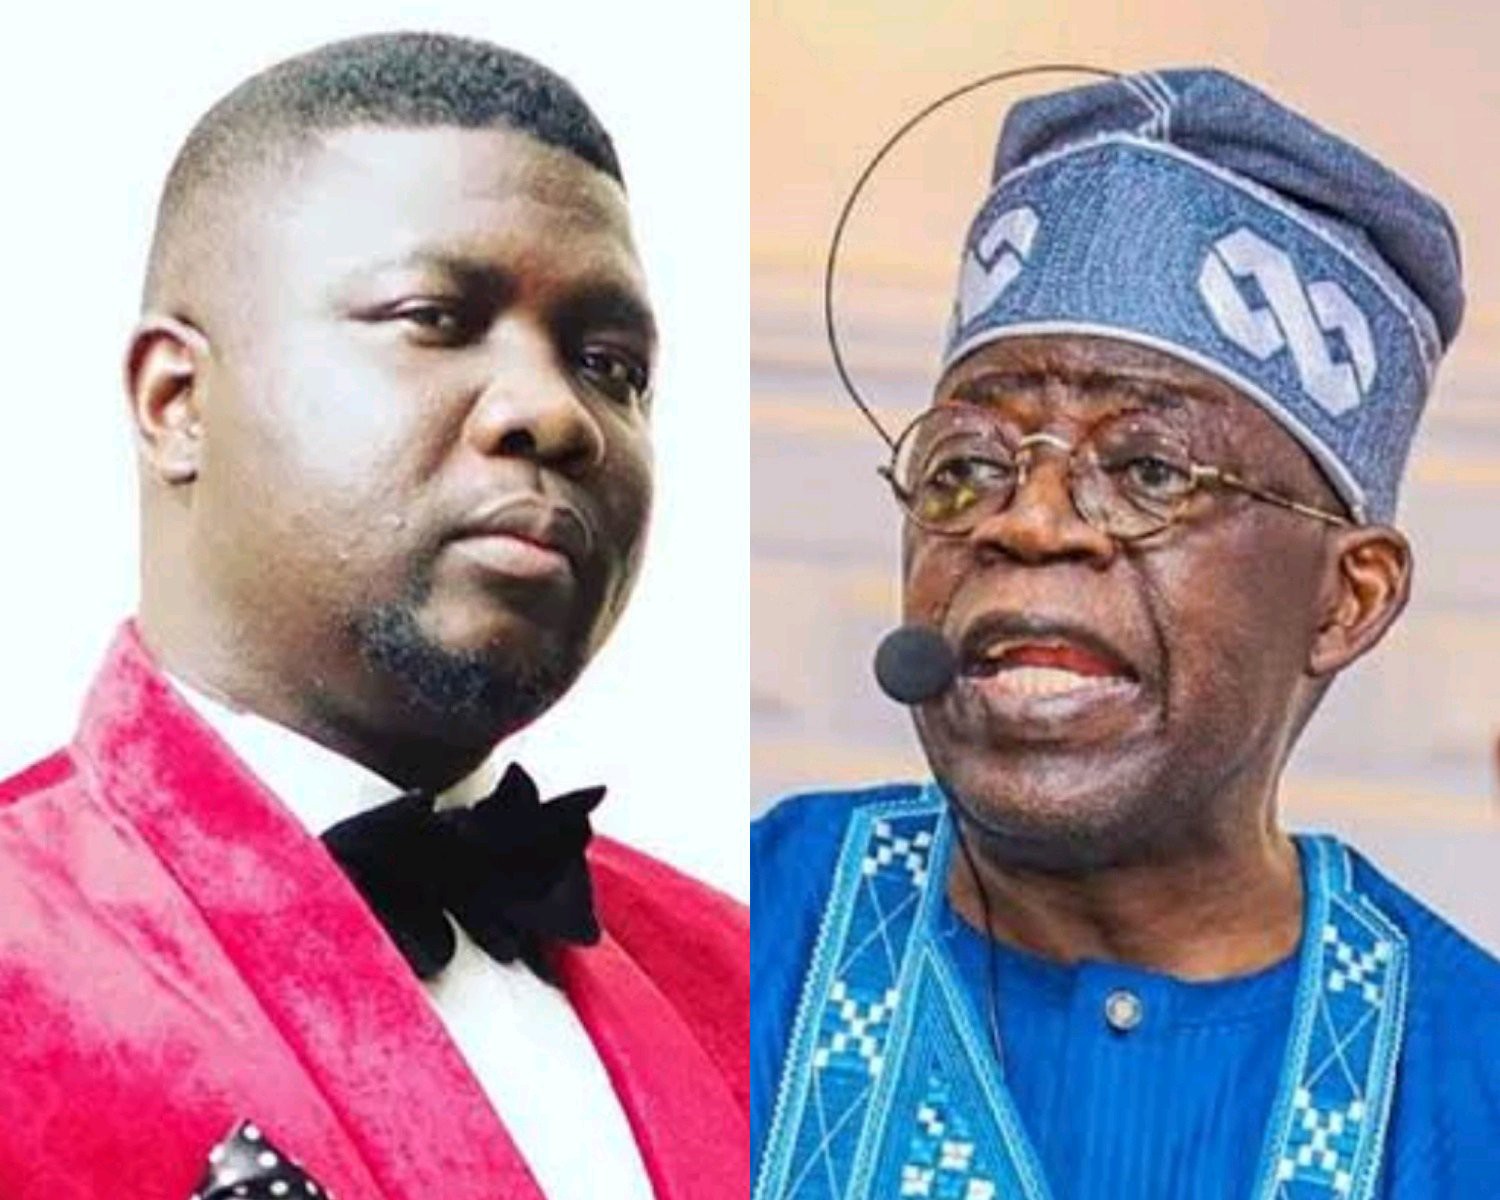 Supporting Tinubu made me poorer, I refunded ₦15.5m to people who were angry I backed Tinubu—According to Seyilaw